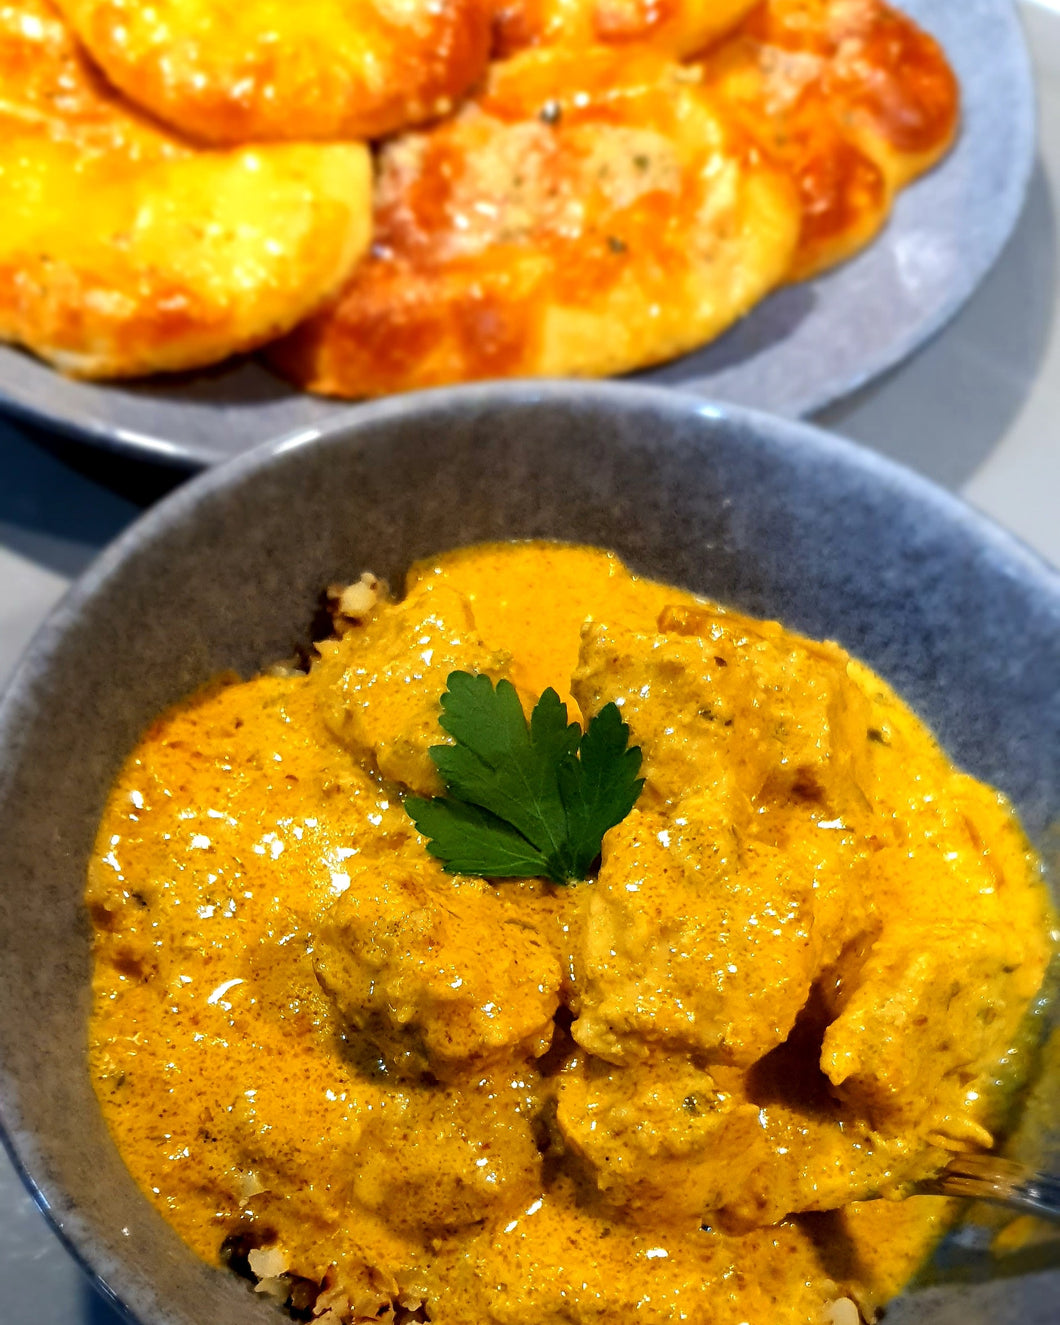 600g Keto Butter Chicken Sauce *PICKUP ONLY*